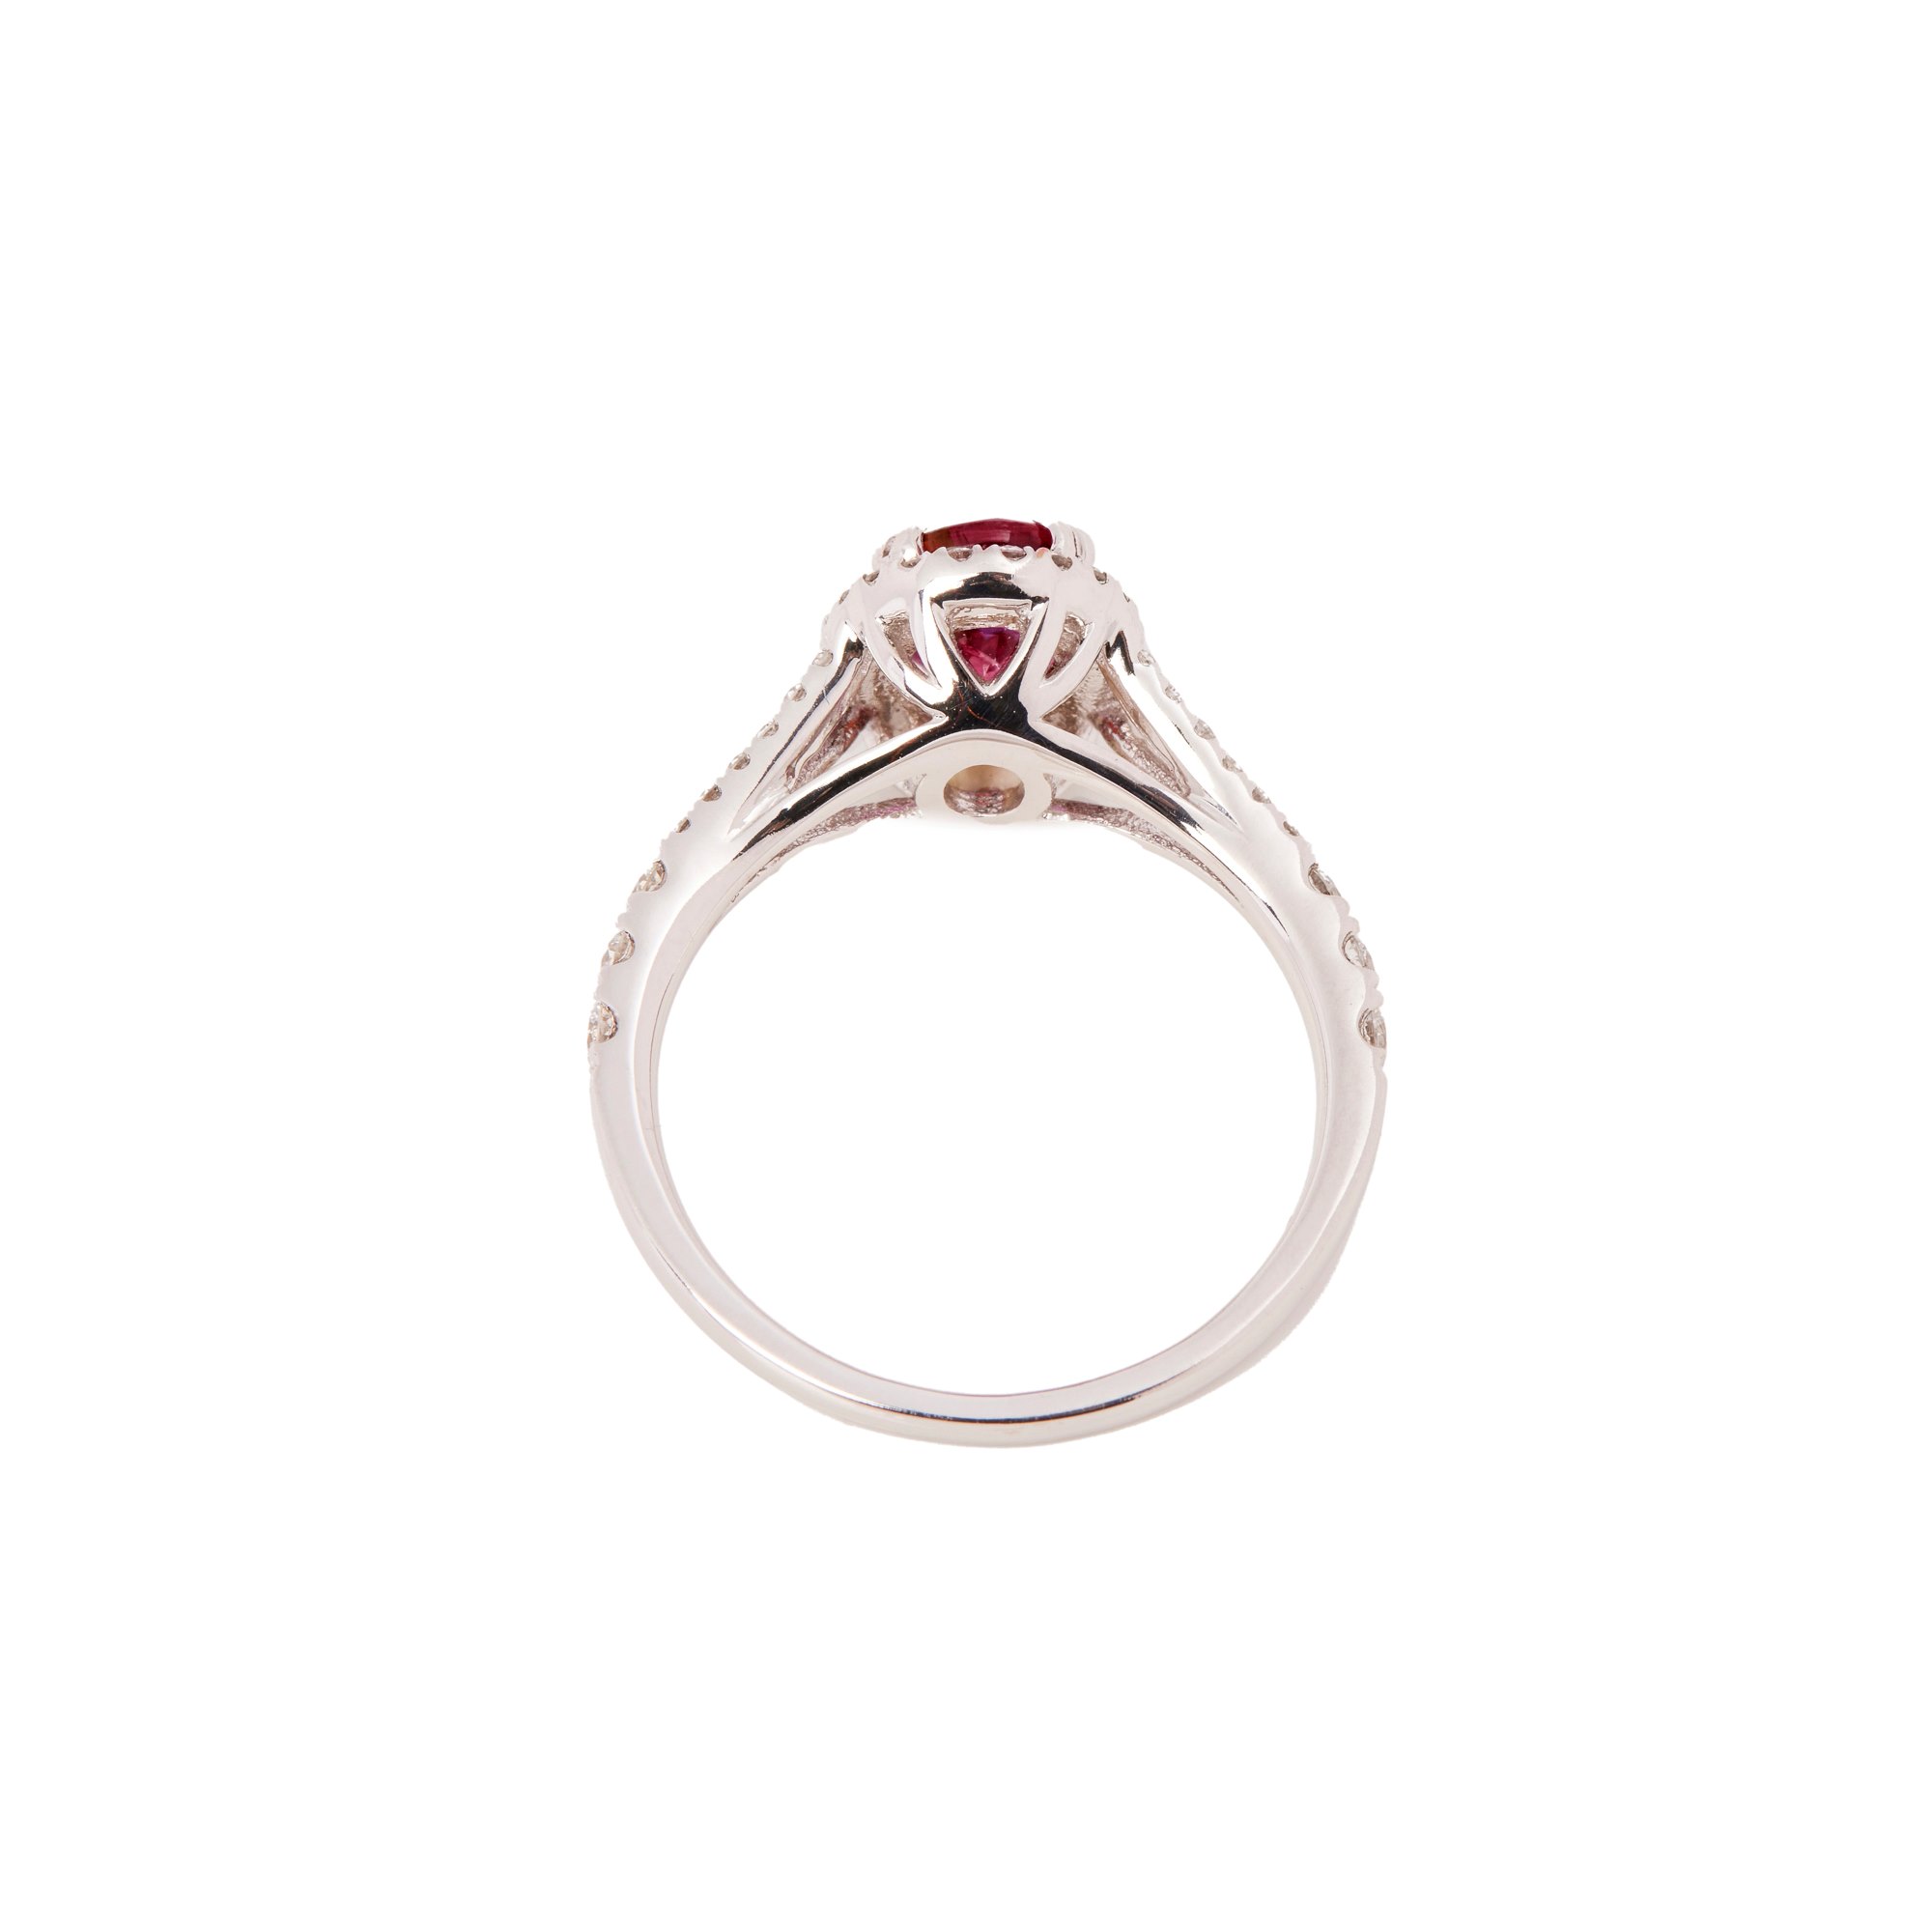 David Jerome Certified 1.44ct Oval Cut Ruby and Diamond Ring